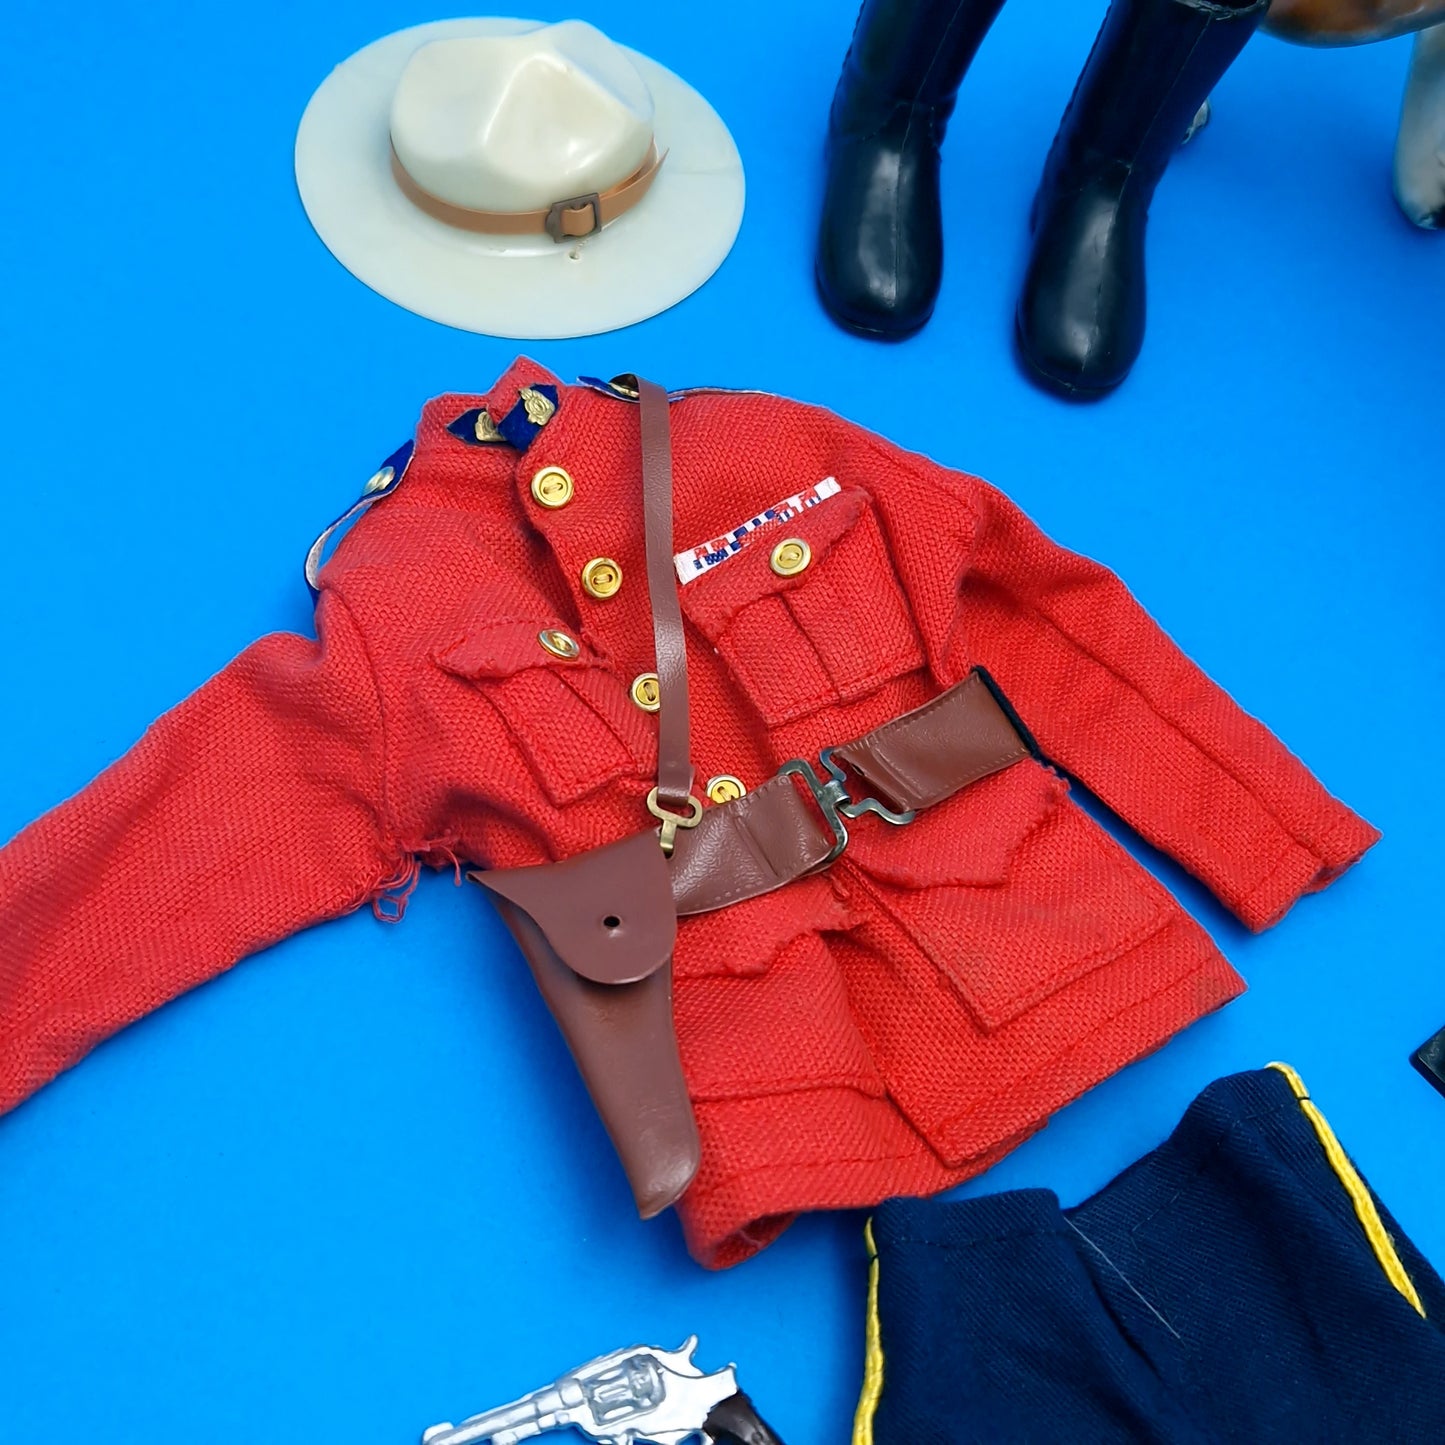 ACTION MAN ☆Royal Canadian Mounted Police BRUTUS TOOL KIT Officer Uniform 60's 70's ☆ Vintage PALITOY Loose